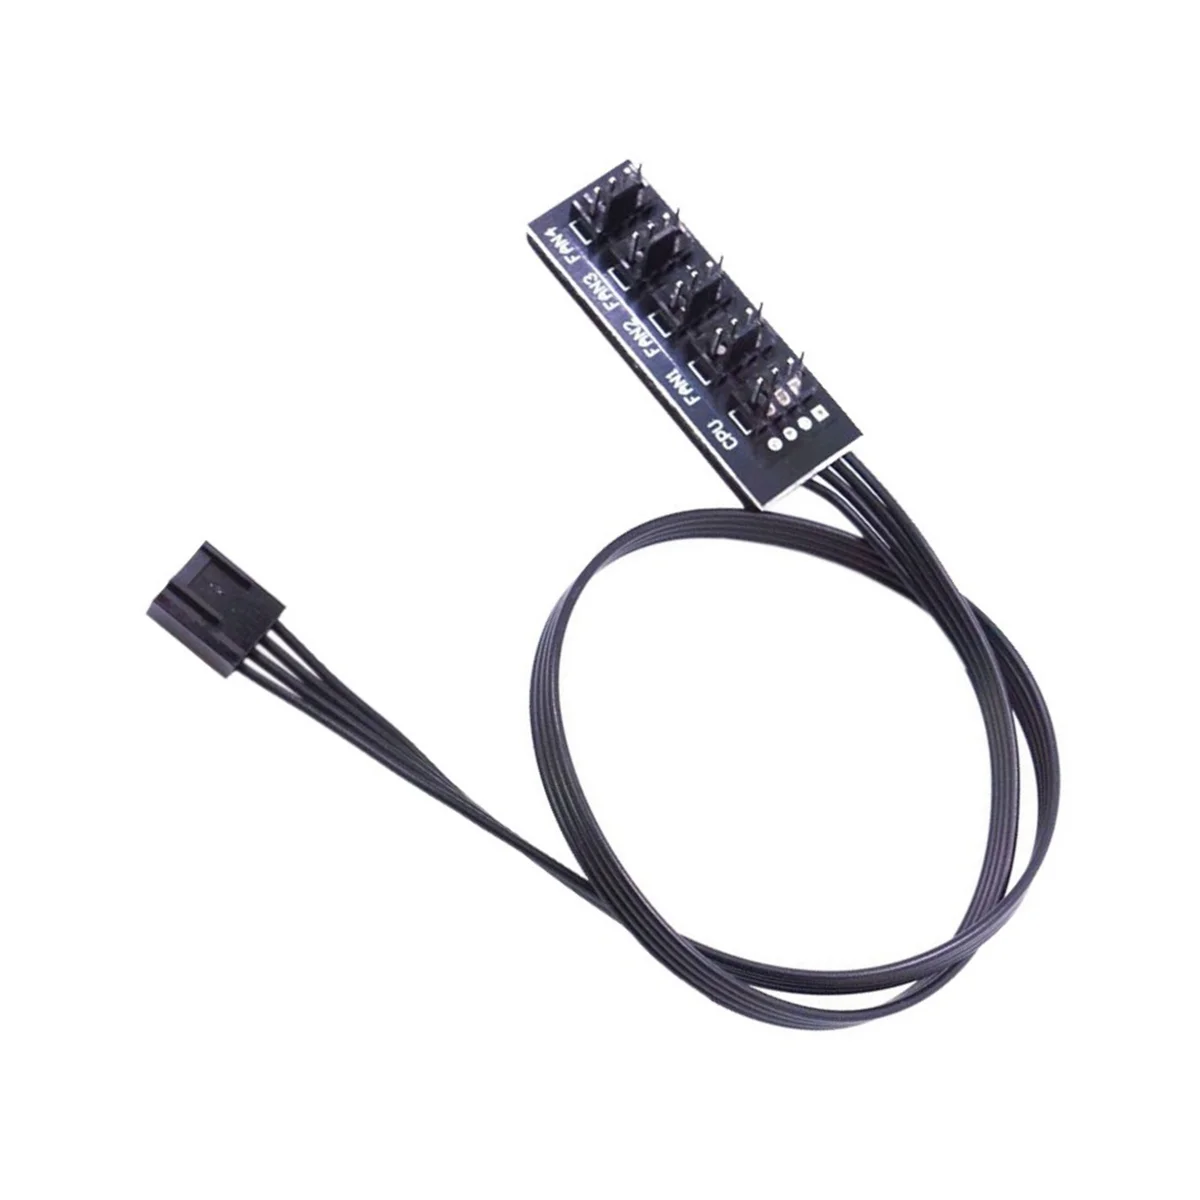 

40cm 1 to 5 4-Pin Molex TX4 PWM Fan CPU HUB Splitter PC Case Chasis Cooler Extension Cable Adapter Controller